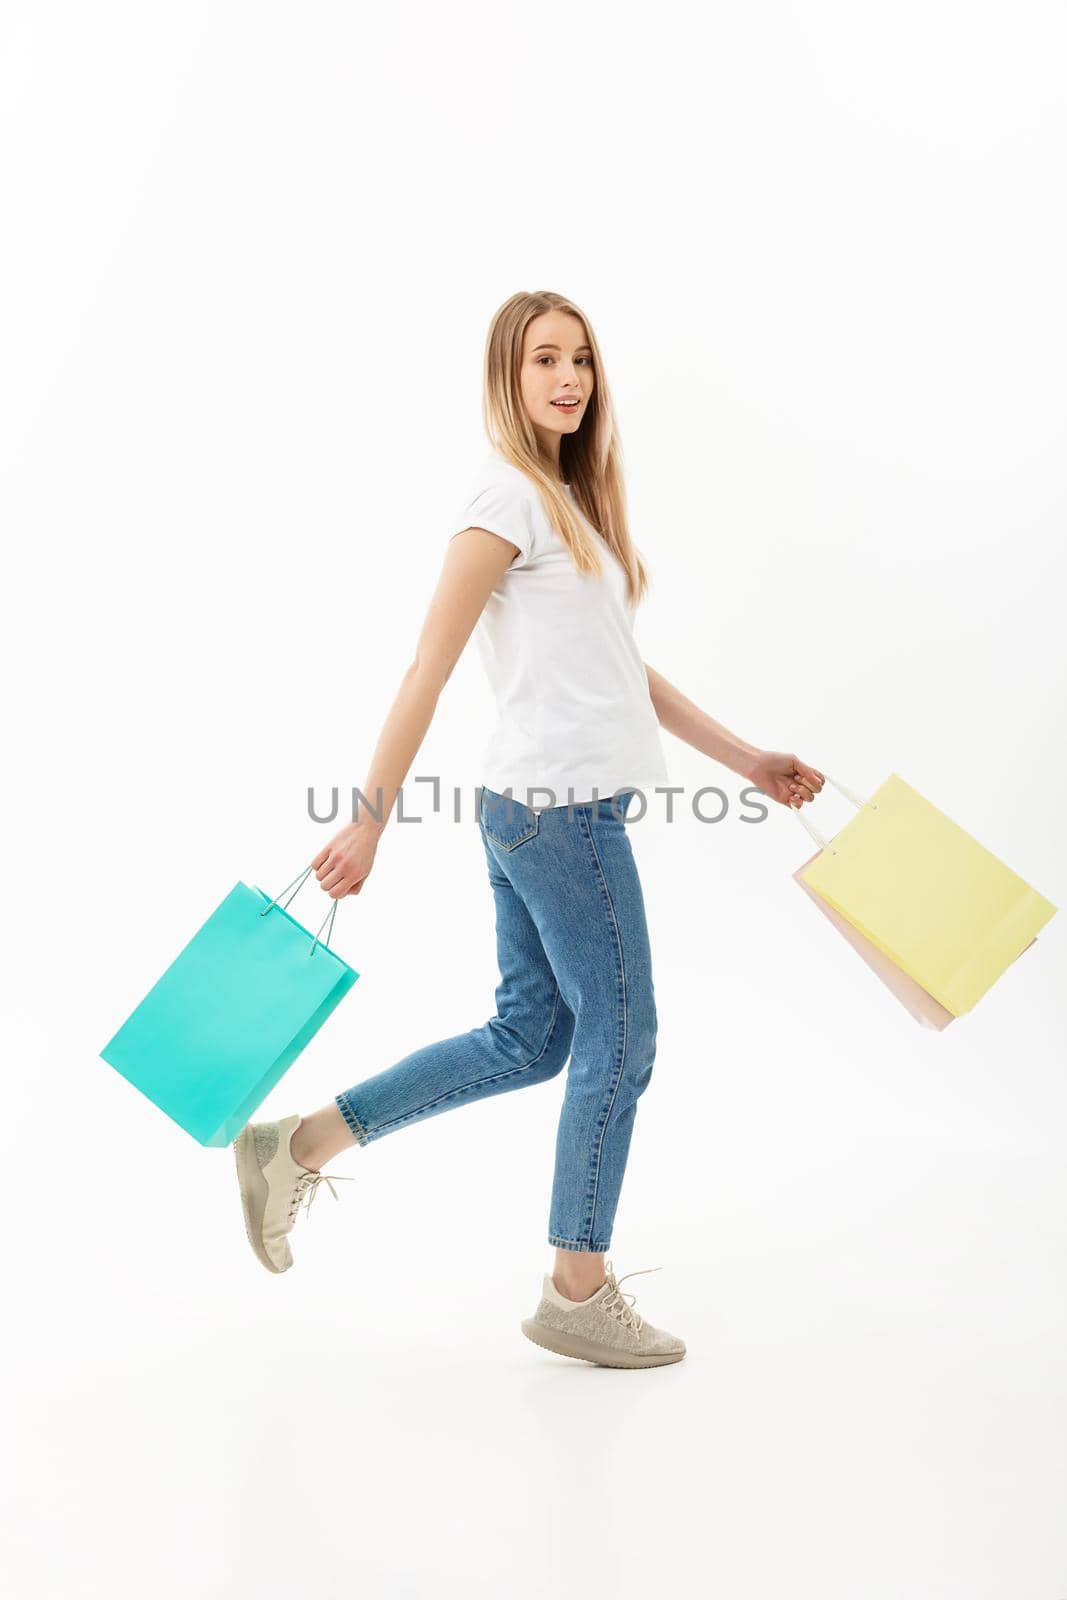 Shopping and Lifestyle Concept: Attractive young caucasain woman holding shopping bags and walking in studio. Full length portrait. Isolated on the white background